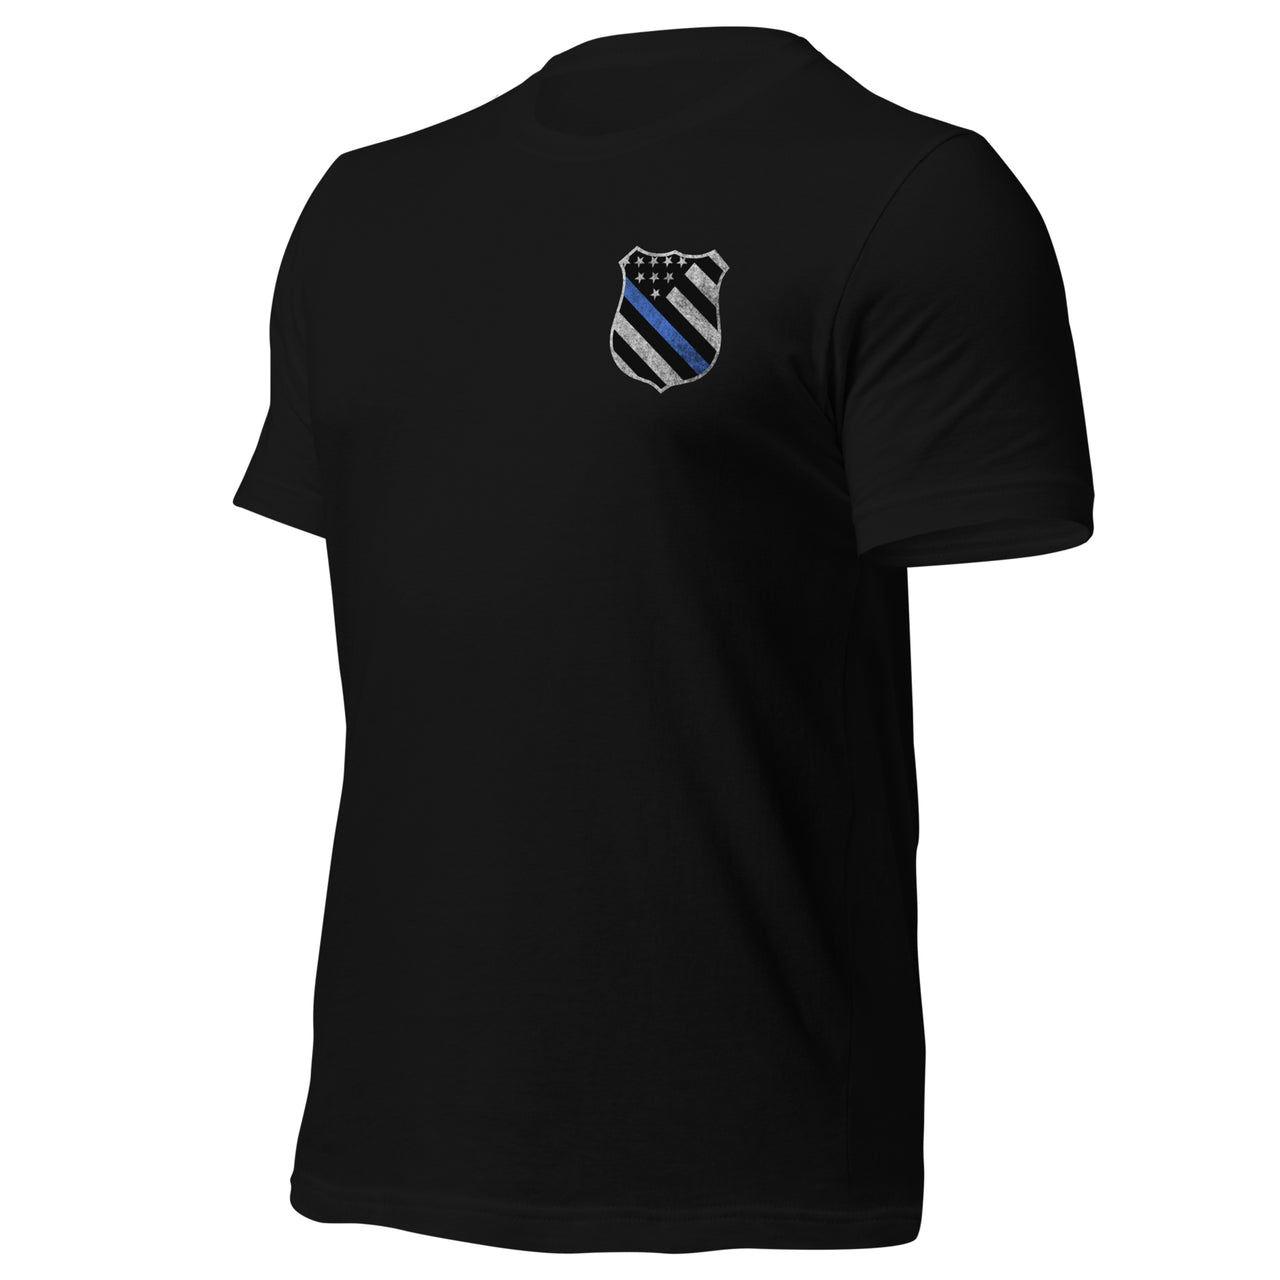 Thin Blue Line T-Shirt Police Support Tee side 